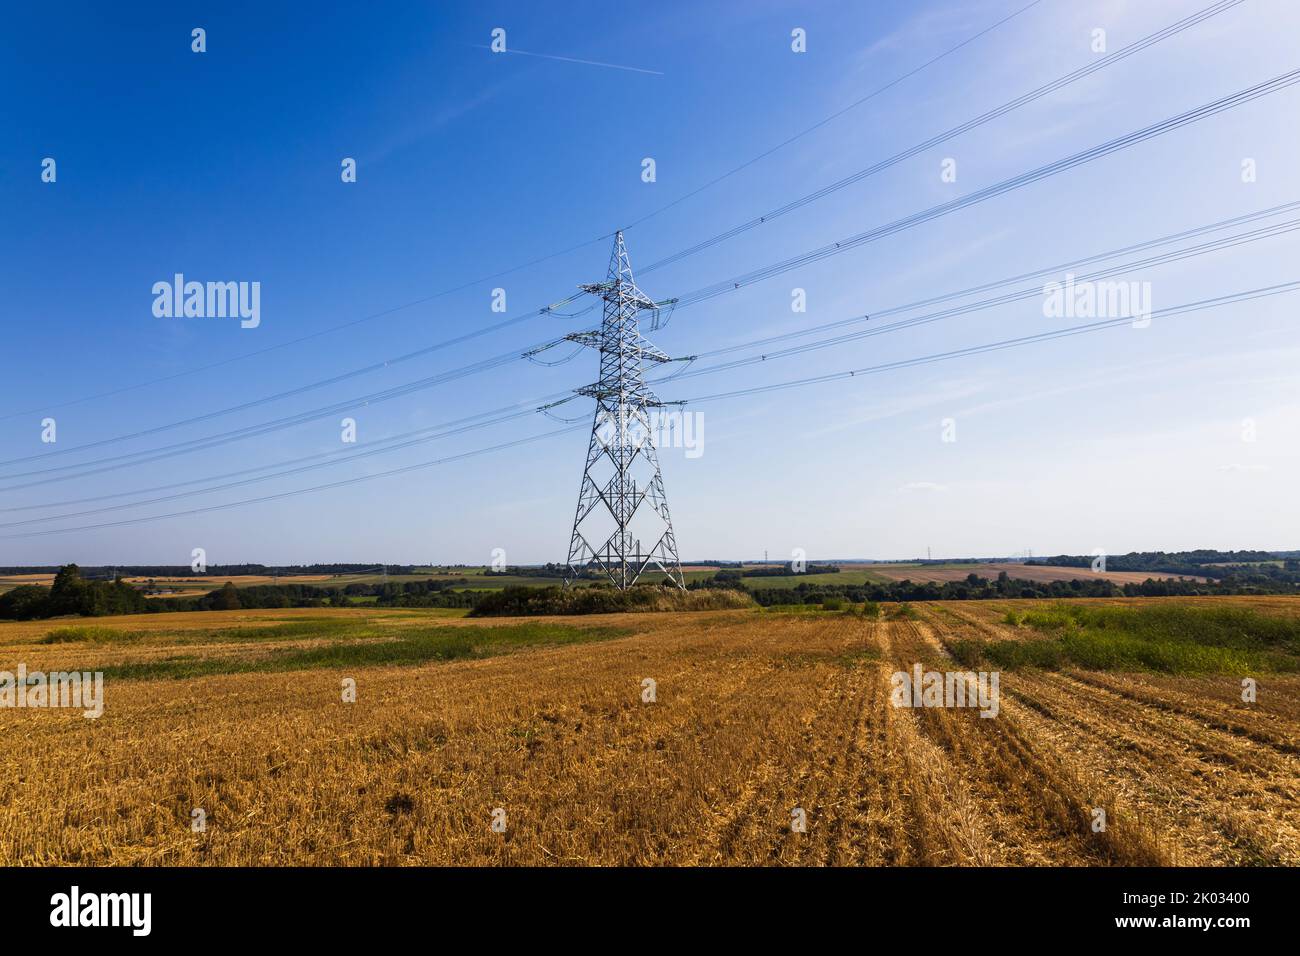 High voltage pole or High voltage electricity tower and transmission power lines Stock Photo